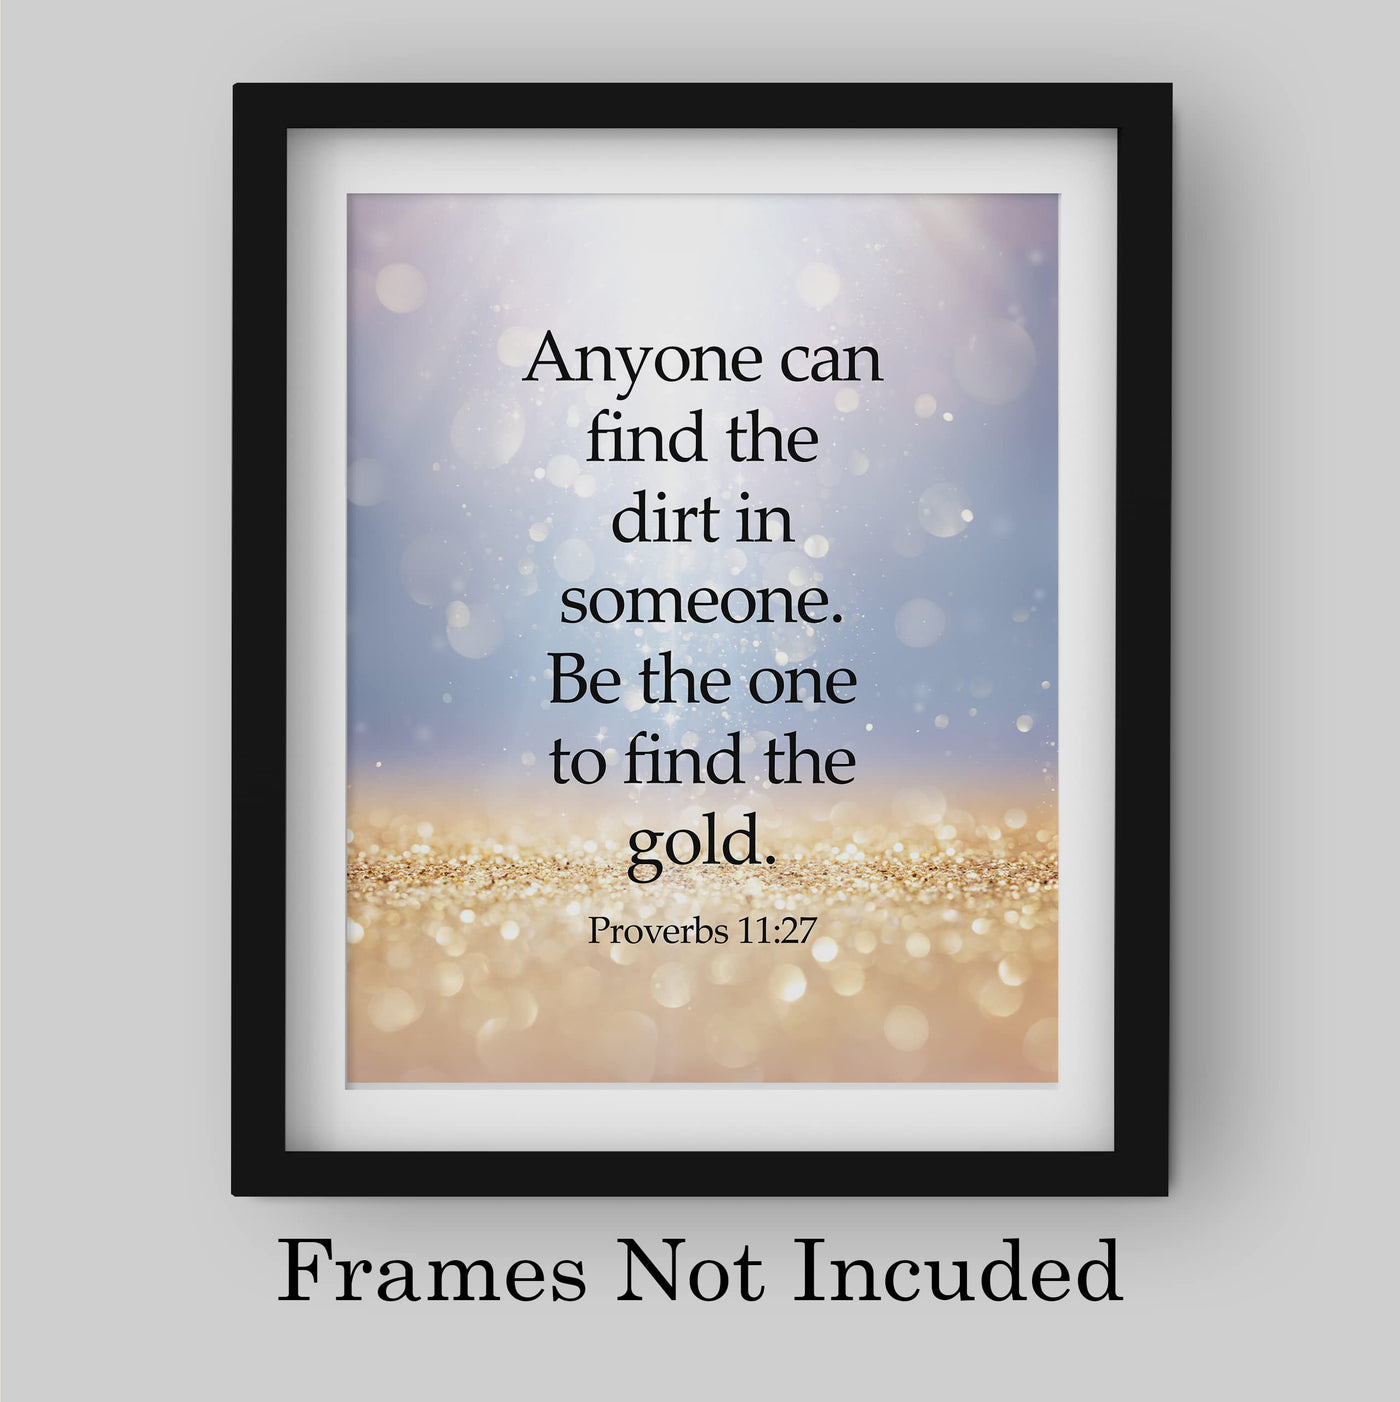 Be the One to Find the Gold in Someone Bible Verse Wall Art -8 x 10" Glitter Design Scripture Print-Ready to Frame. Home-Office-Church-Classroom Decor. Great Christian Gift of Faith! Proverbs 11:27